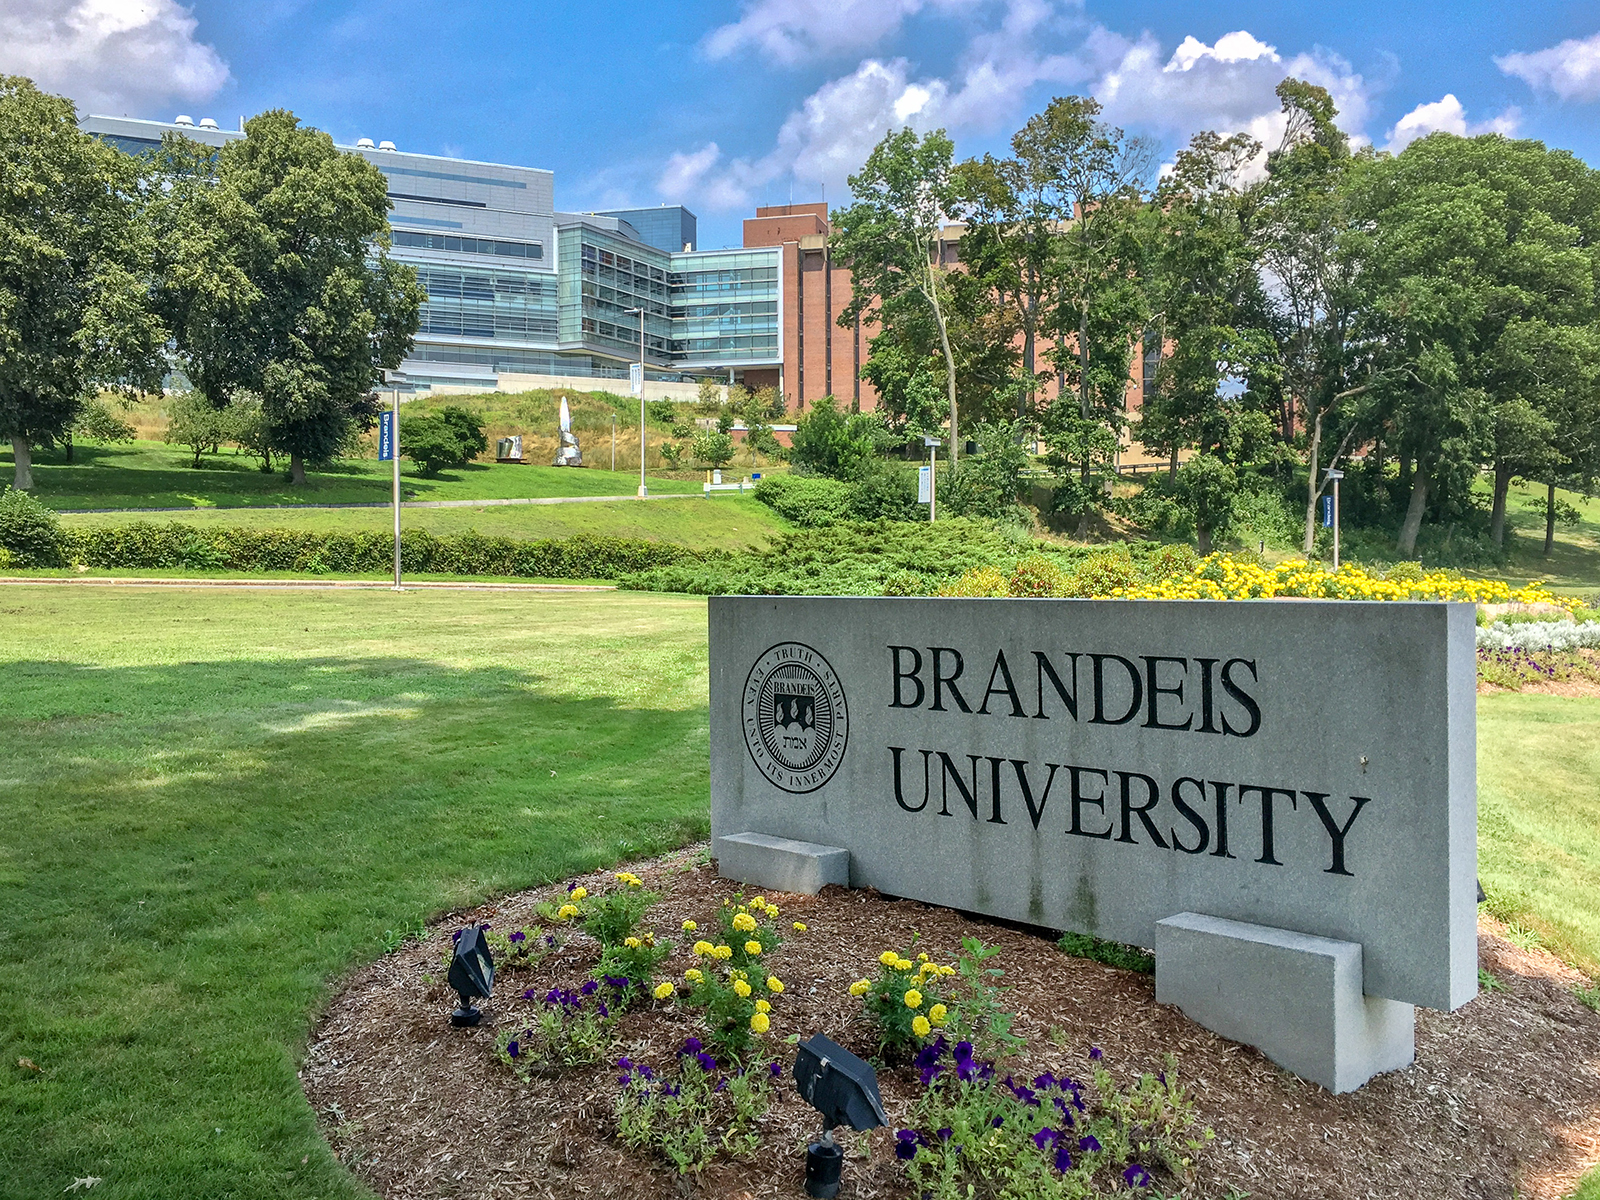 A sign marks the entrance of Brandeis University in Waltham, Massachusetts, on Aug. 7, 2018. Photo by Kenneth C. Zirkel/Creative Commons